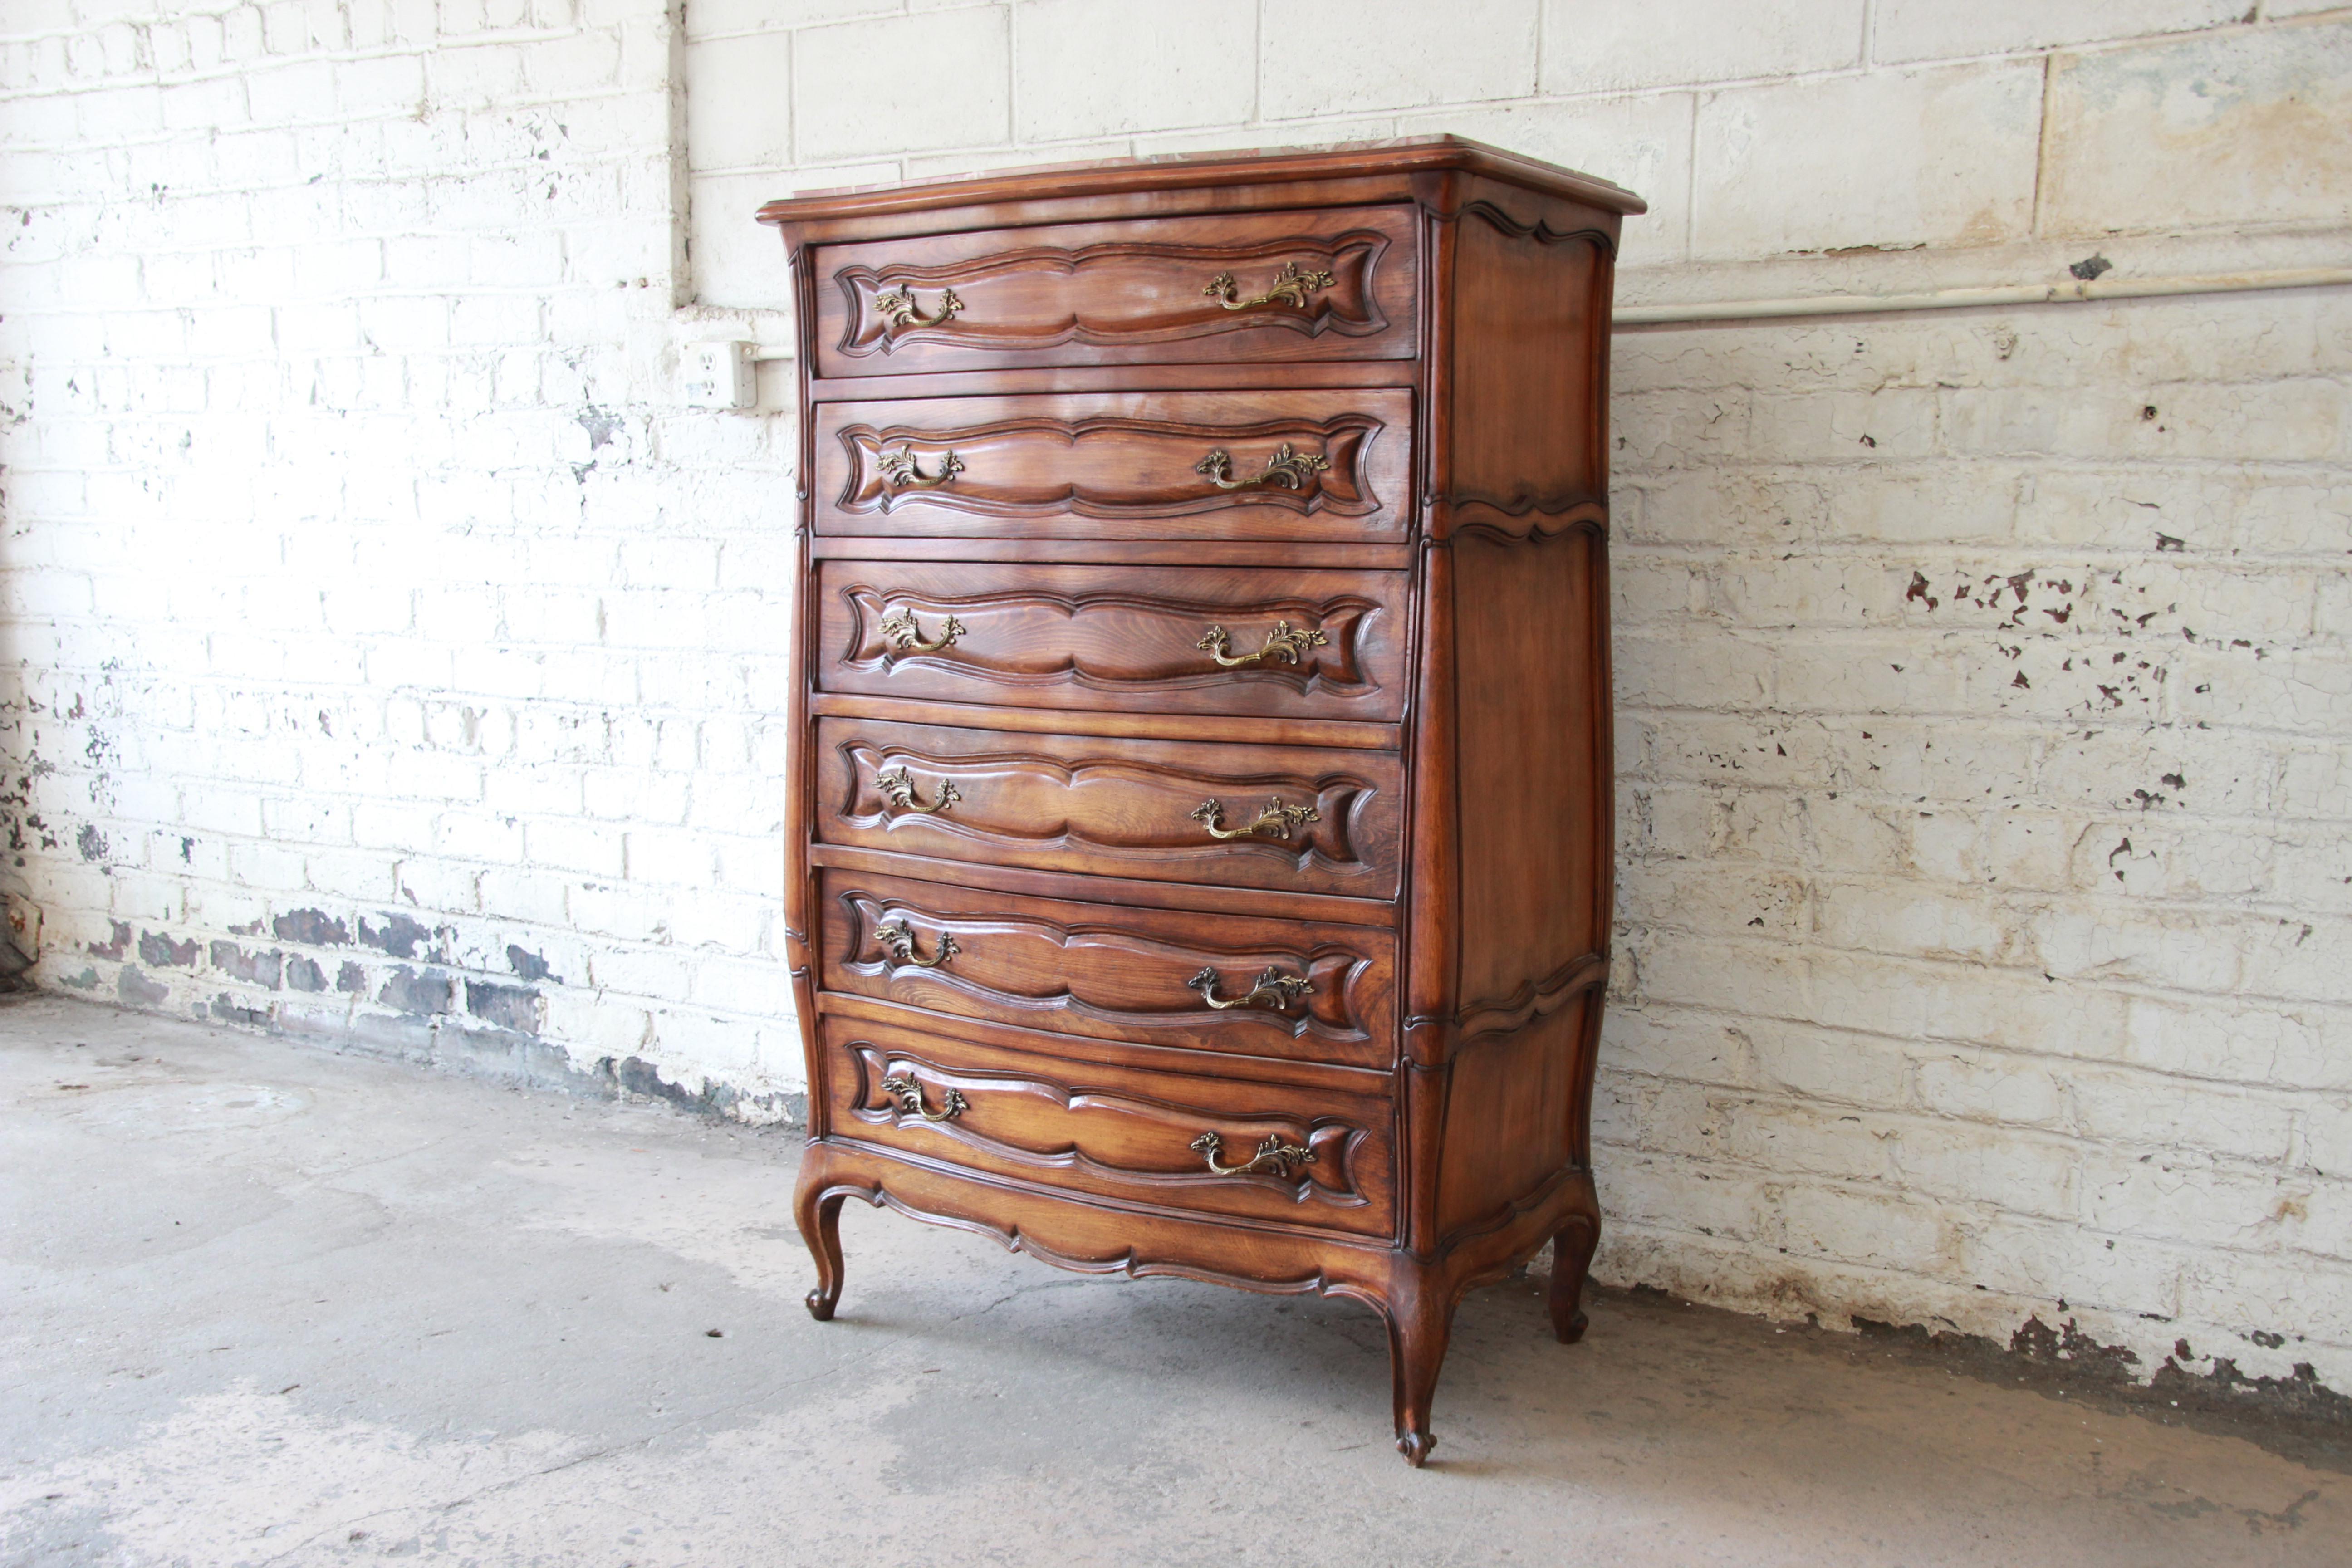 Offering a beautiful vintage Louis XV style marble top highboy dresser from Italy. This substantial French highboy features six drawers for storage and nice pink marble top. The piece is stamped made in Italy and is from the mid-20th century. The